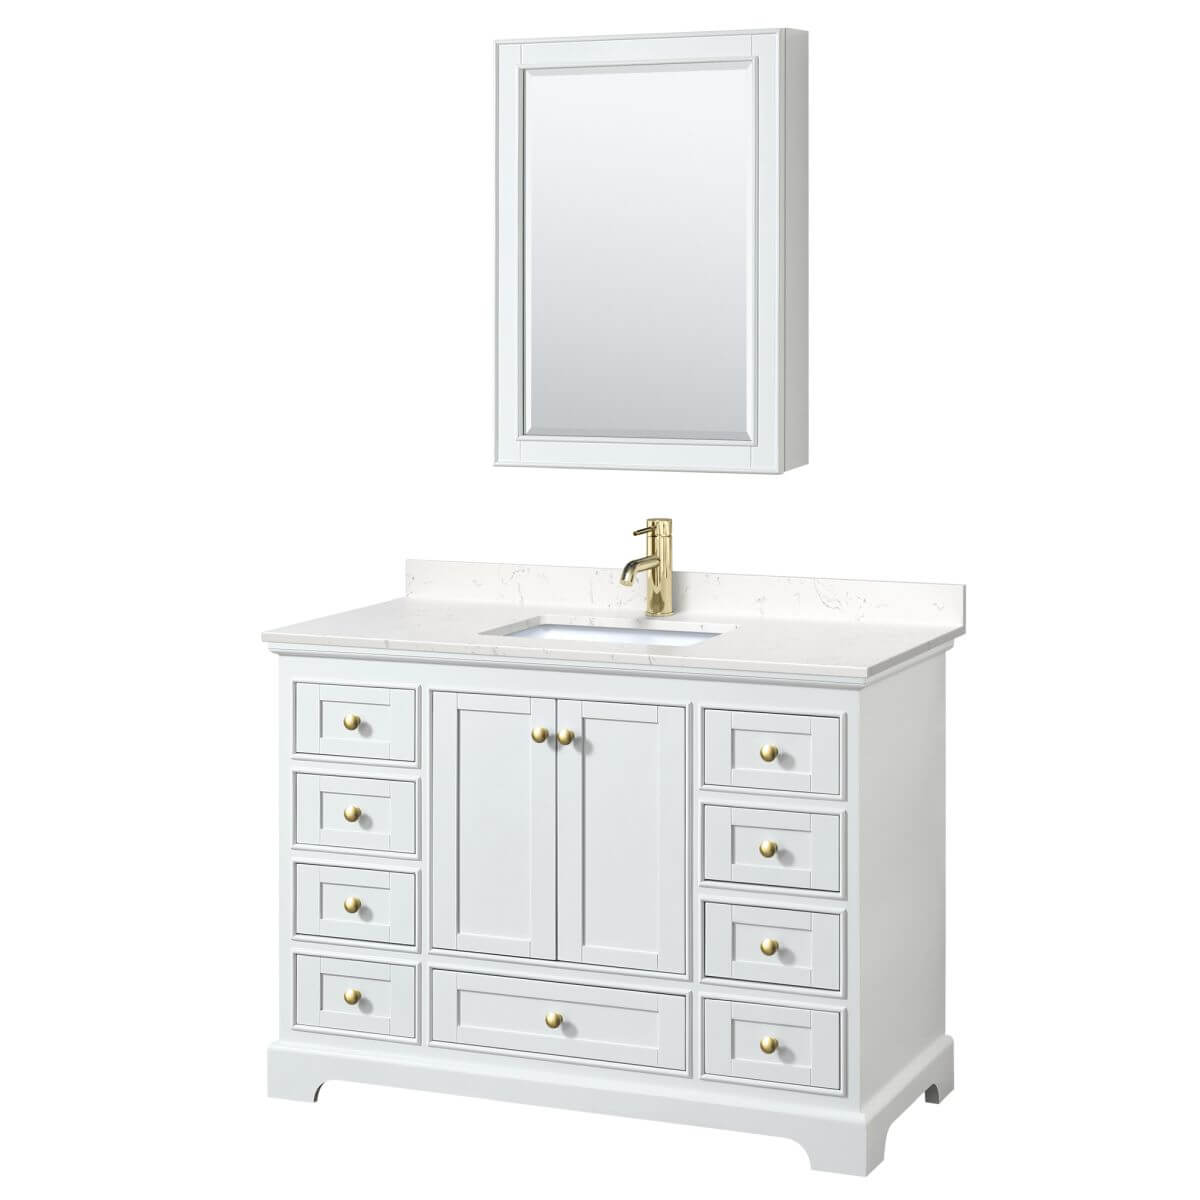 Wyndham Collection Deborah 48 inch Single Bathroom Vanity in White with Carrara Cultured Marble Countertop, Undermount Square Sink, Brushed Gold Trim and Medicine Cabinet - WCS202048SWGC2UNSMED